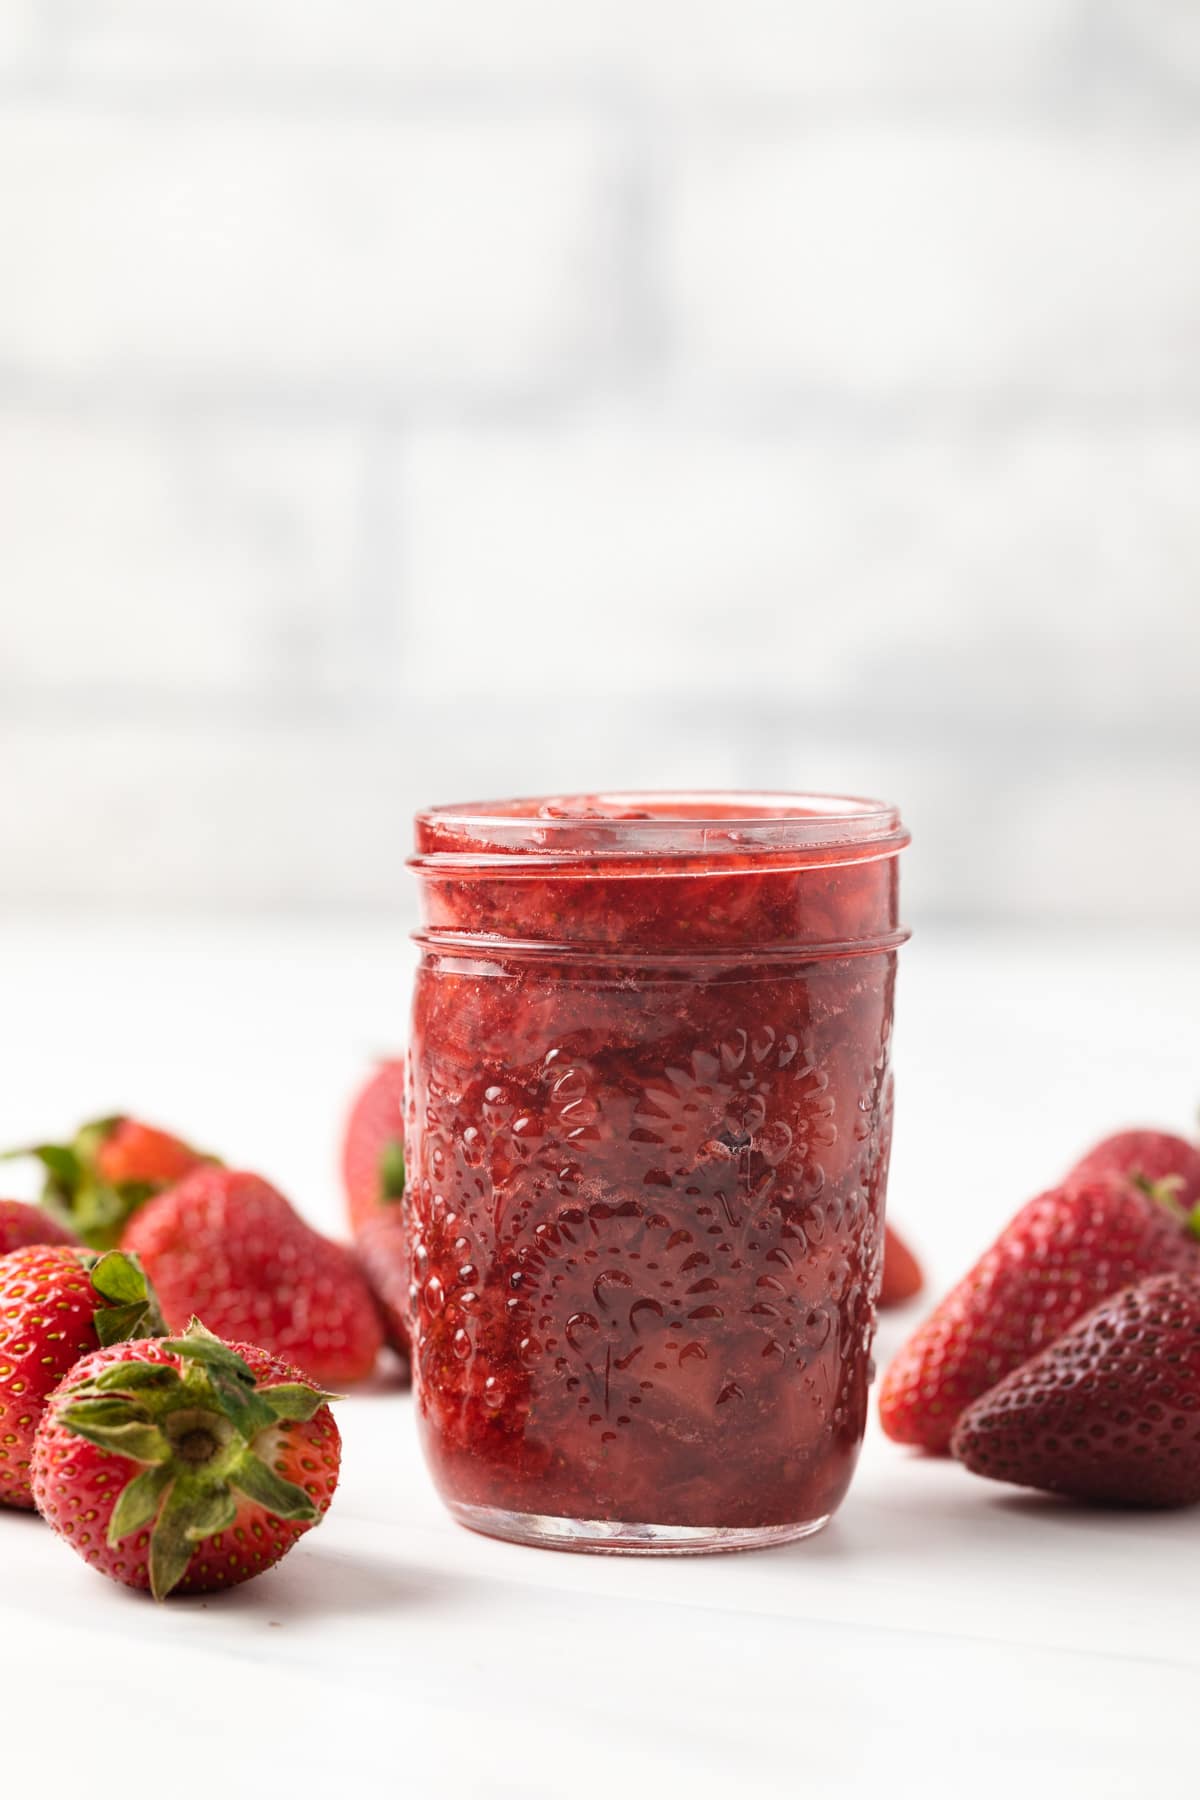 Side view of strawberry sauce in a jar.